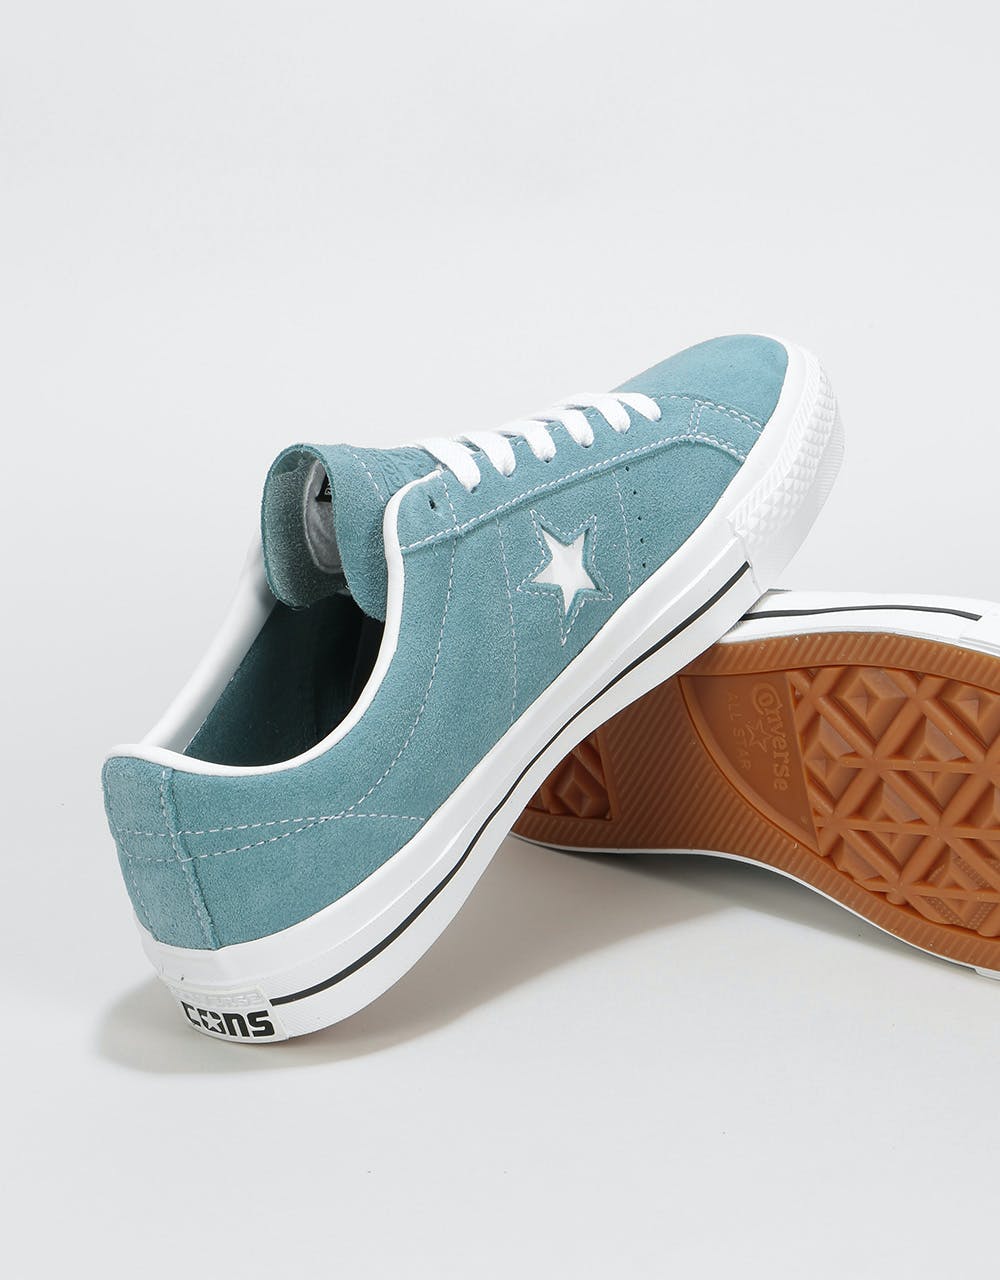 Converse One Star Pro Ox Skate Shoes - Celestial Teal/Black/White